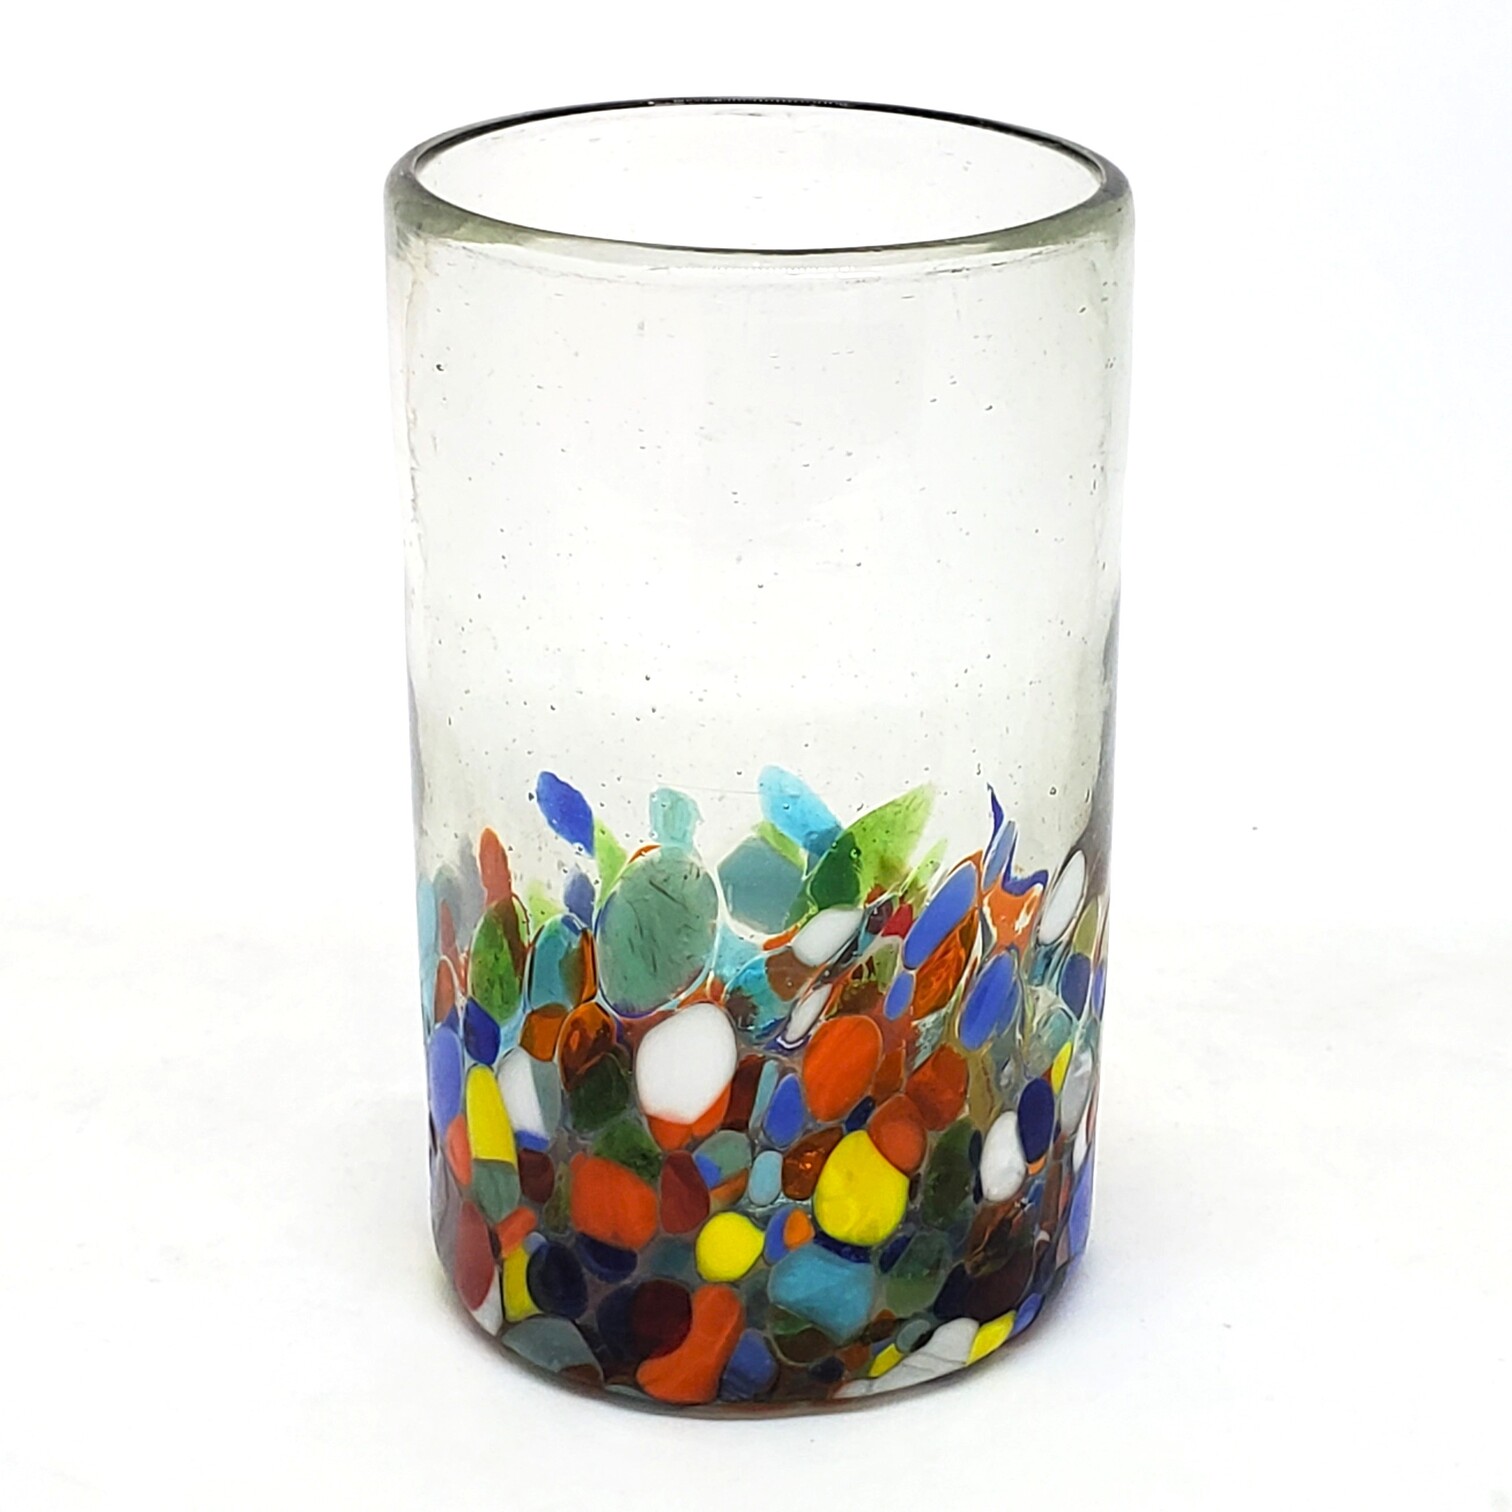 MEXICAN GLASSWARE / Clear & Confetti 14 oz Drinking Glasses (set of 6) / Our Clear & Confetti drinking glasses combine the best of two worlds: clear, thick, sturdy handcrafted glass on top, meets the colorful, festive, confetti bottom! These glasses will sure be a standout in any table setting or as a fabulous gift for your loved ones. Crafted one by one by skilled artisans in Tonala, Mexico, each glass is different from the next making them unique works of art. You'll be amazed at how they make having a simple glass of water a happier experience. Made from eco-friendly recycled glass.